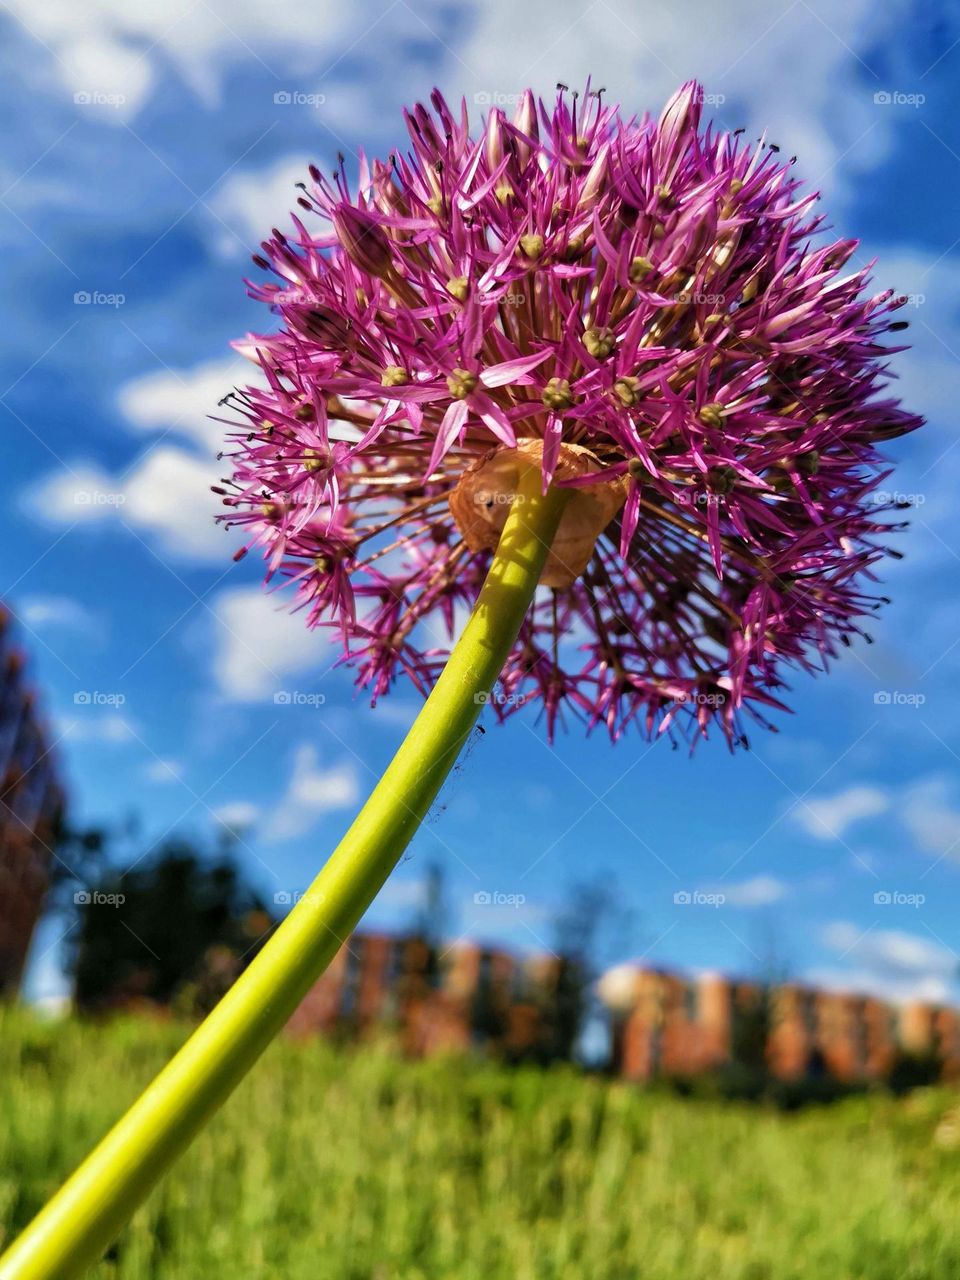 From the ground up shooting. Unusual shooting angle. Beautiful flower portrait. Purple flower and blue sky background.